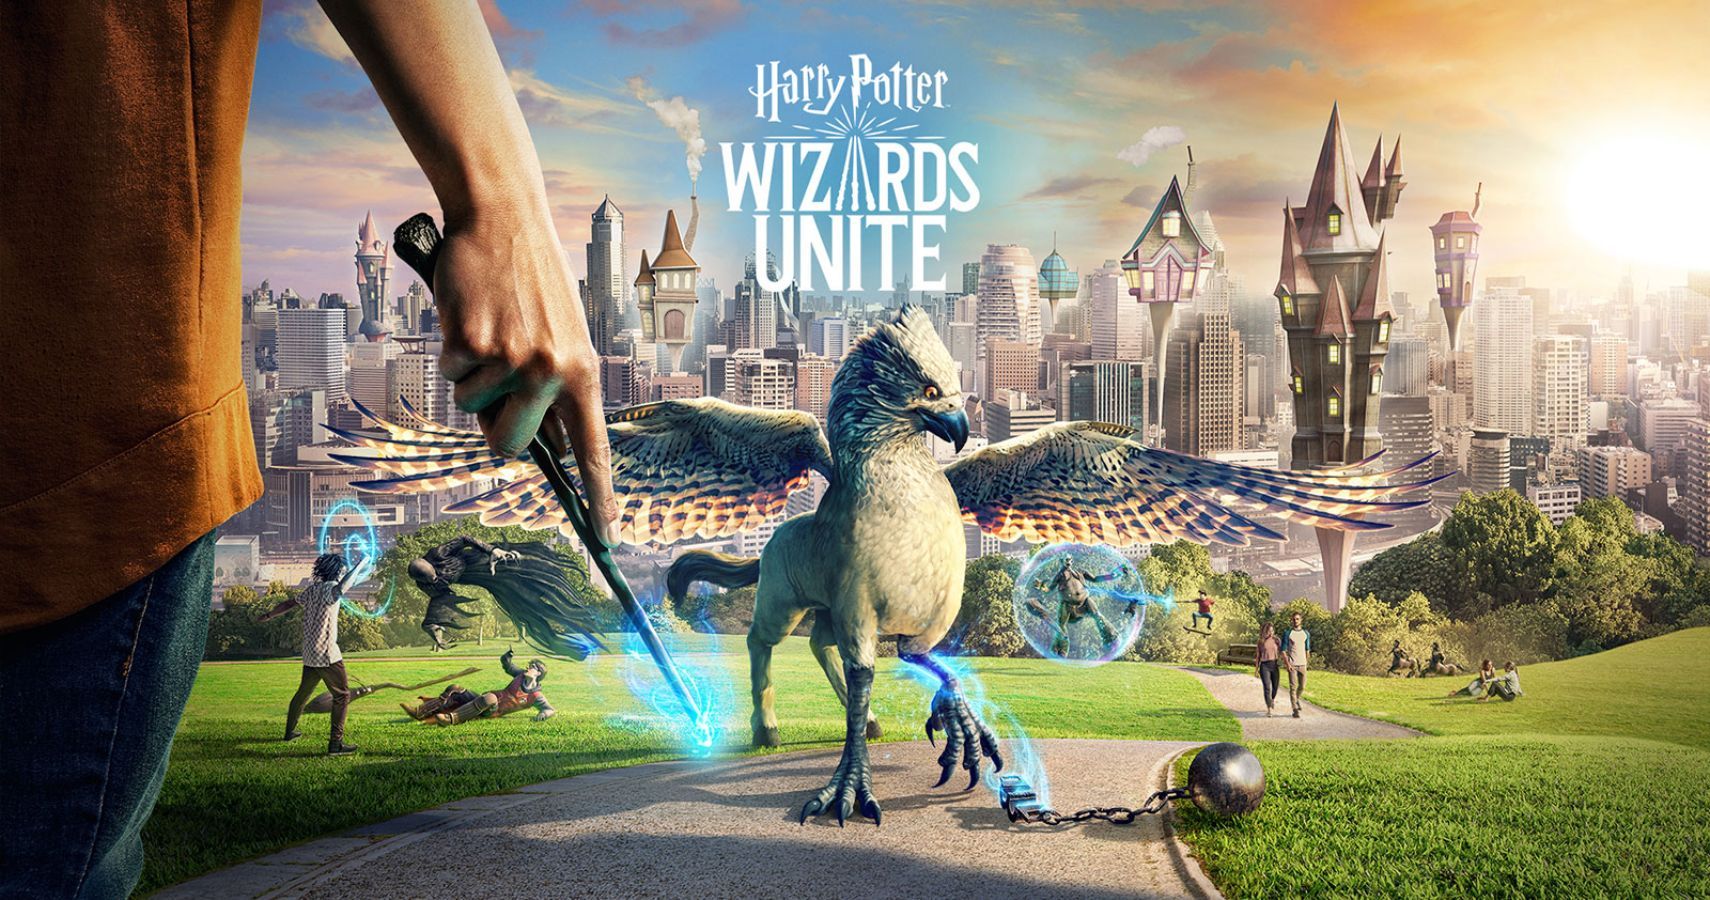 Wizards Unite Harry Potter Wand Hippogriff